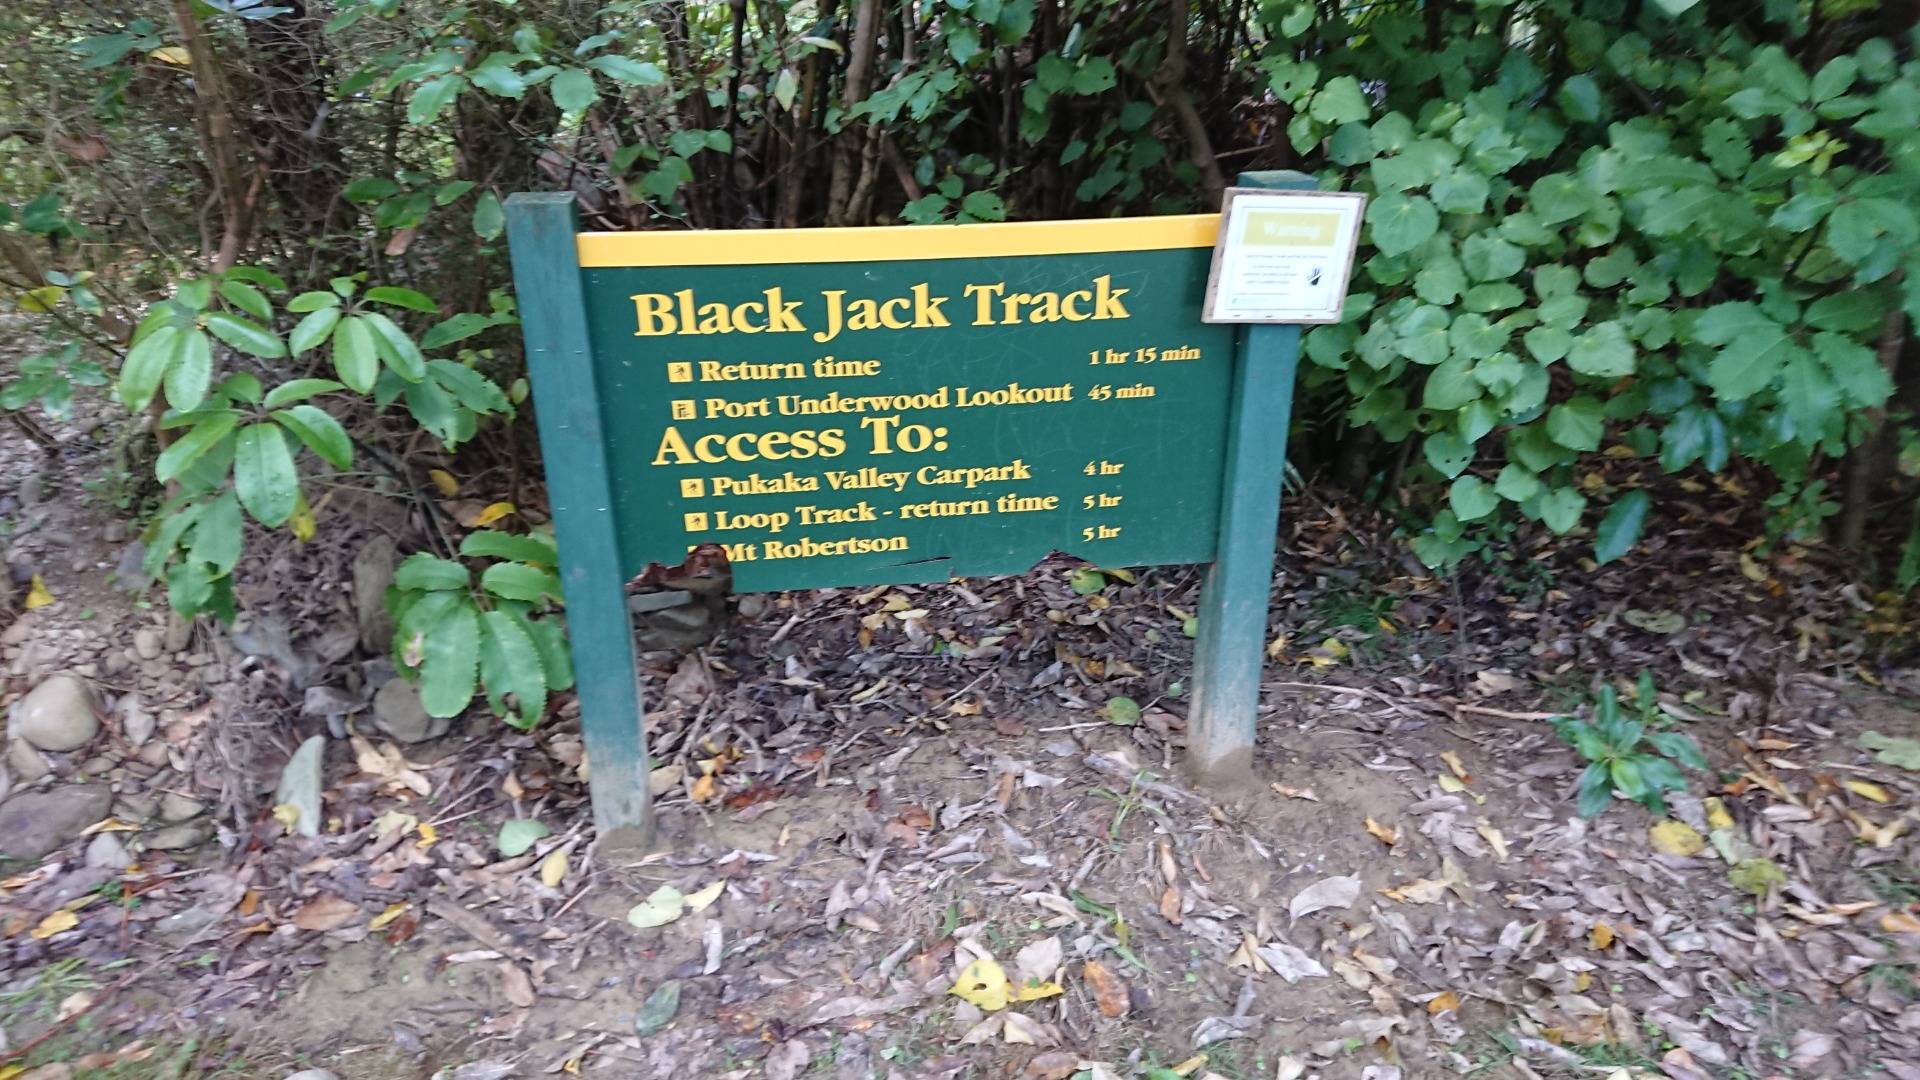 ...but we’re heading along the Black Jack Trail...